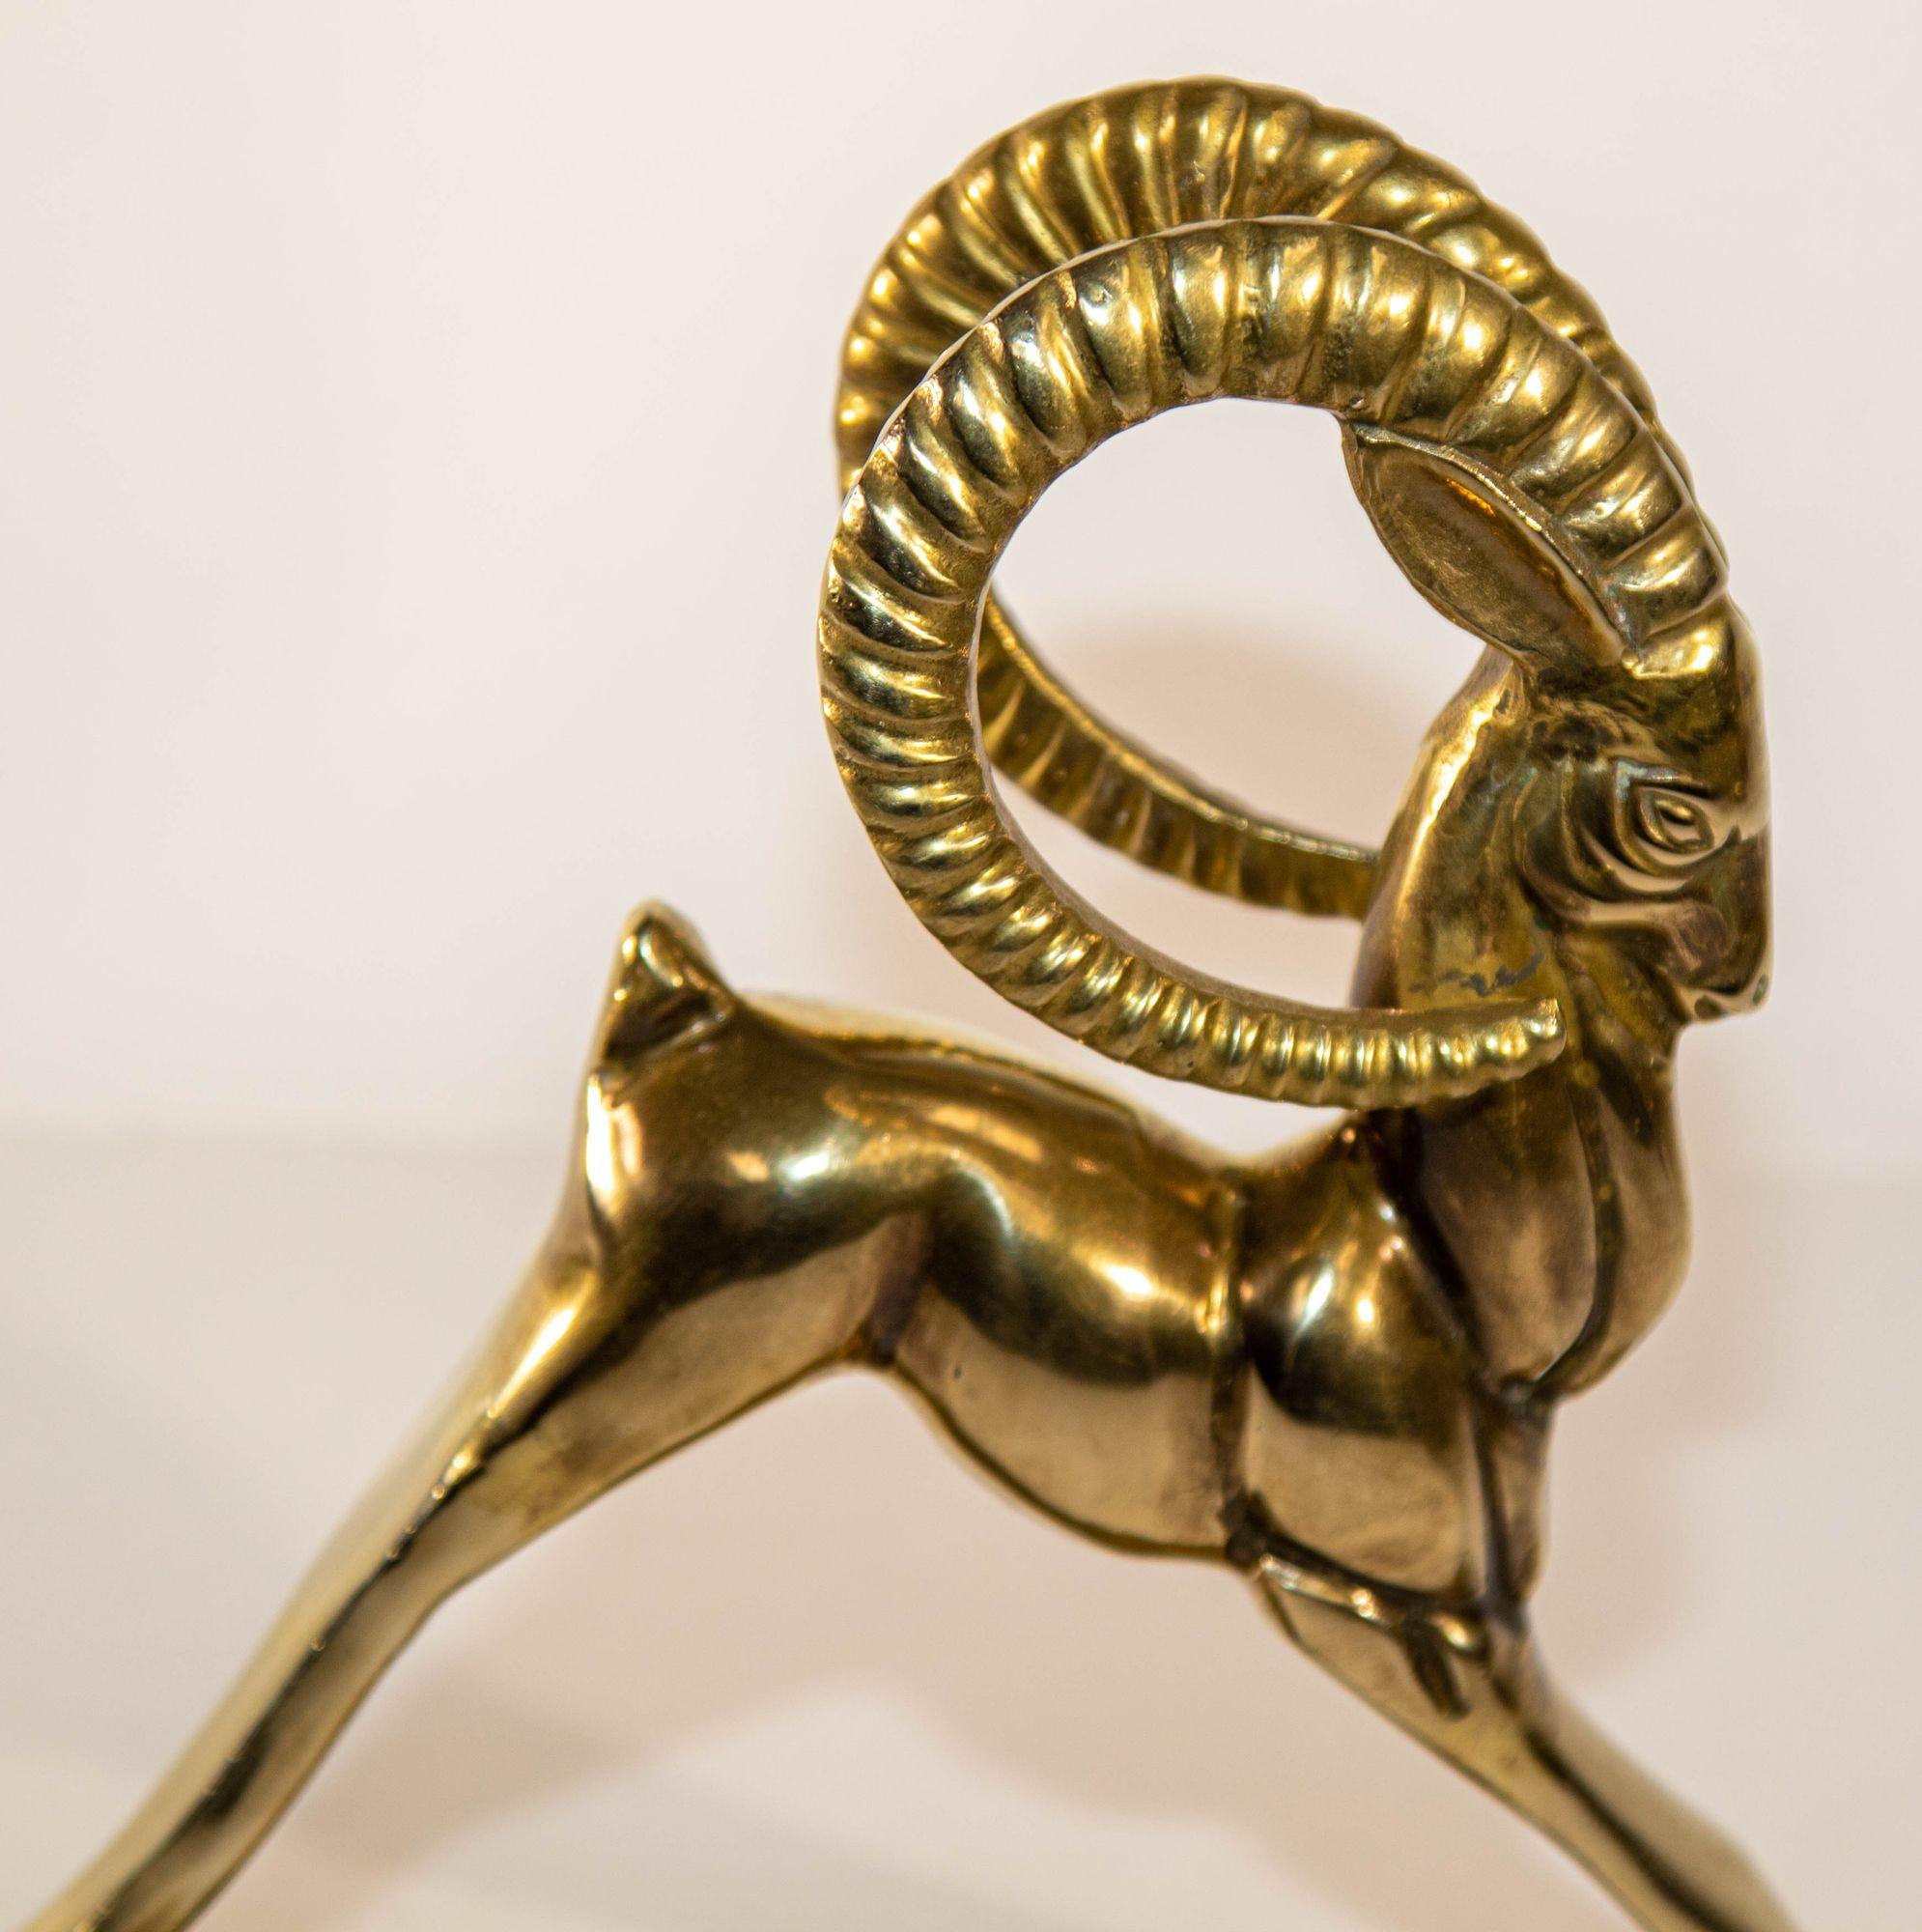 Vintage French Art Deco Style Sculpture of Brass Ibex Antelope For Sale 7